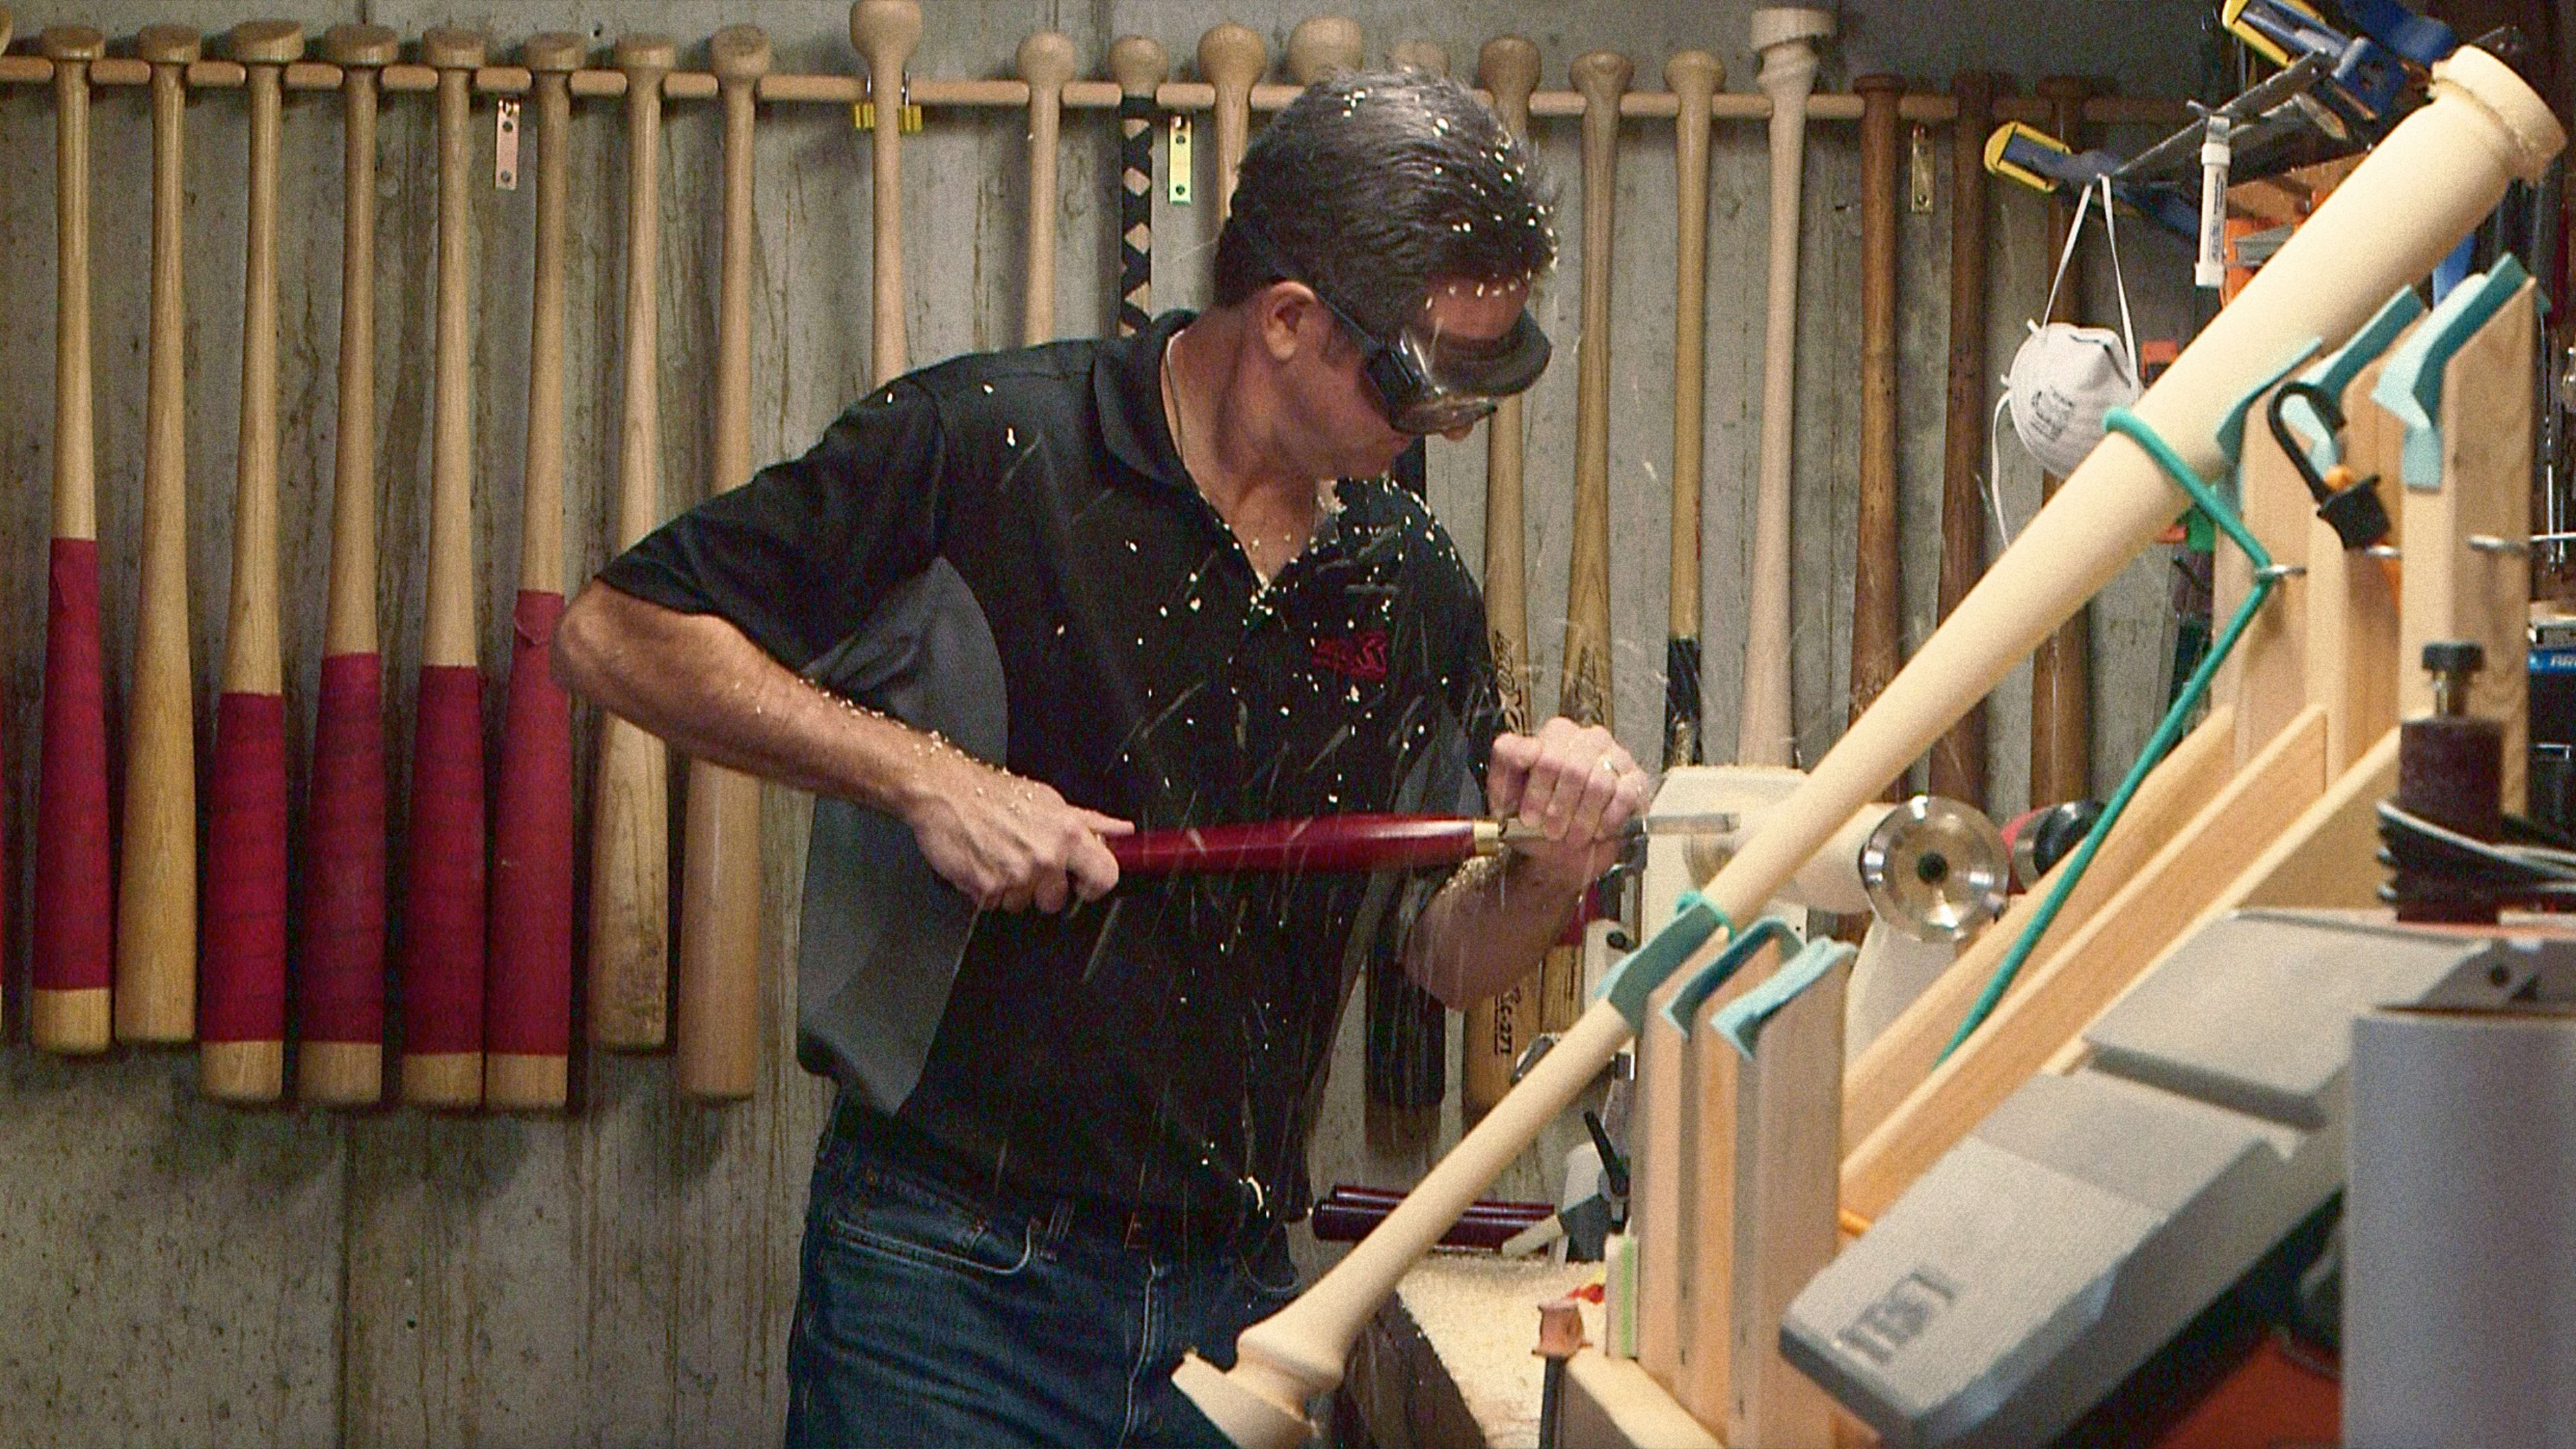 A backyard accident led this dad to design a new bat that is changing Major League Baseball